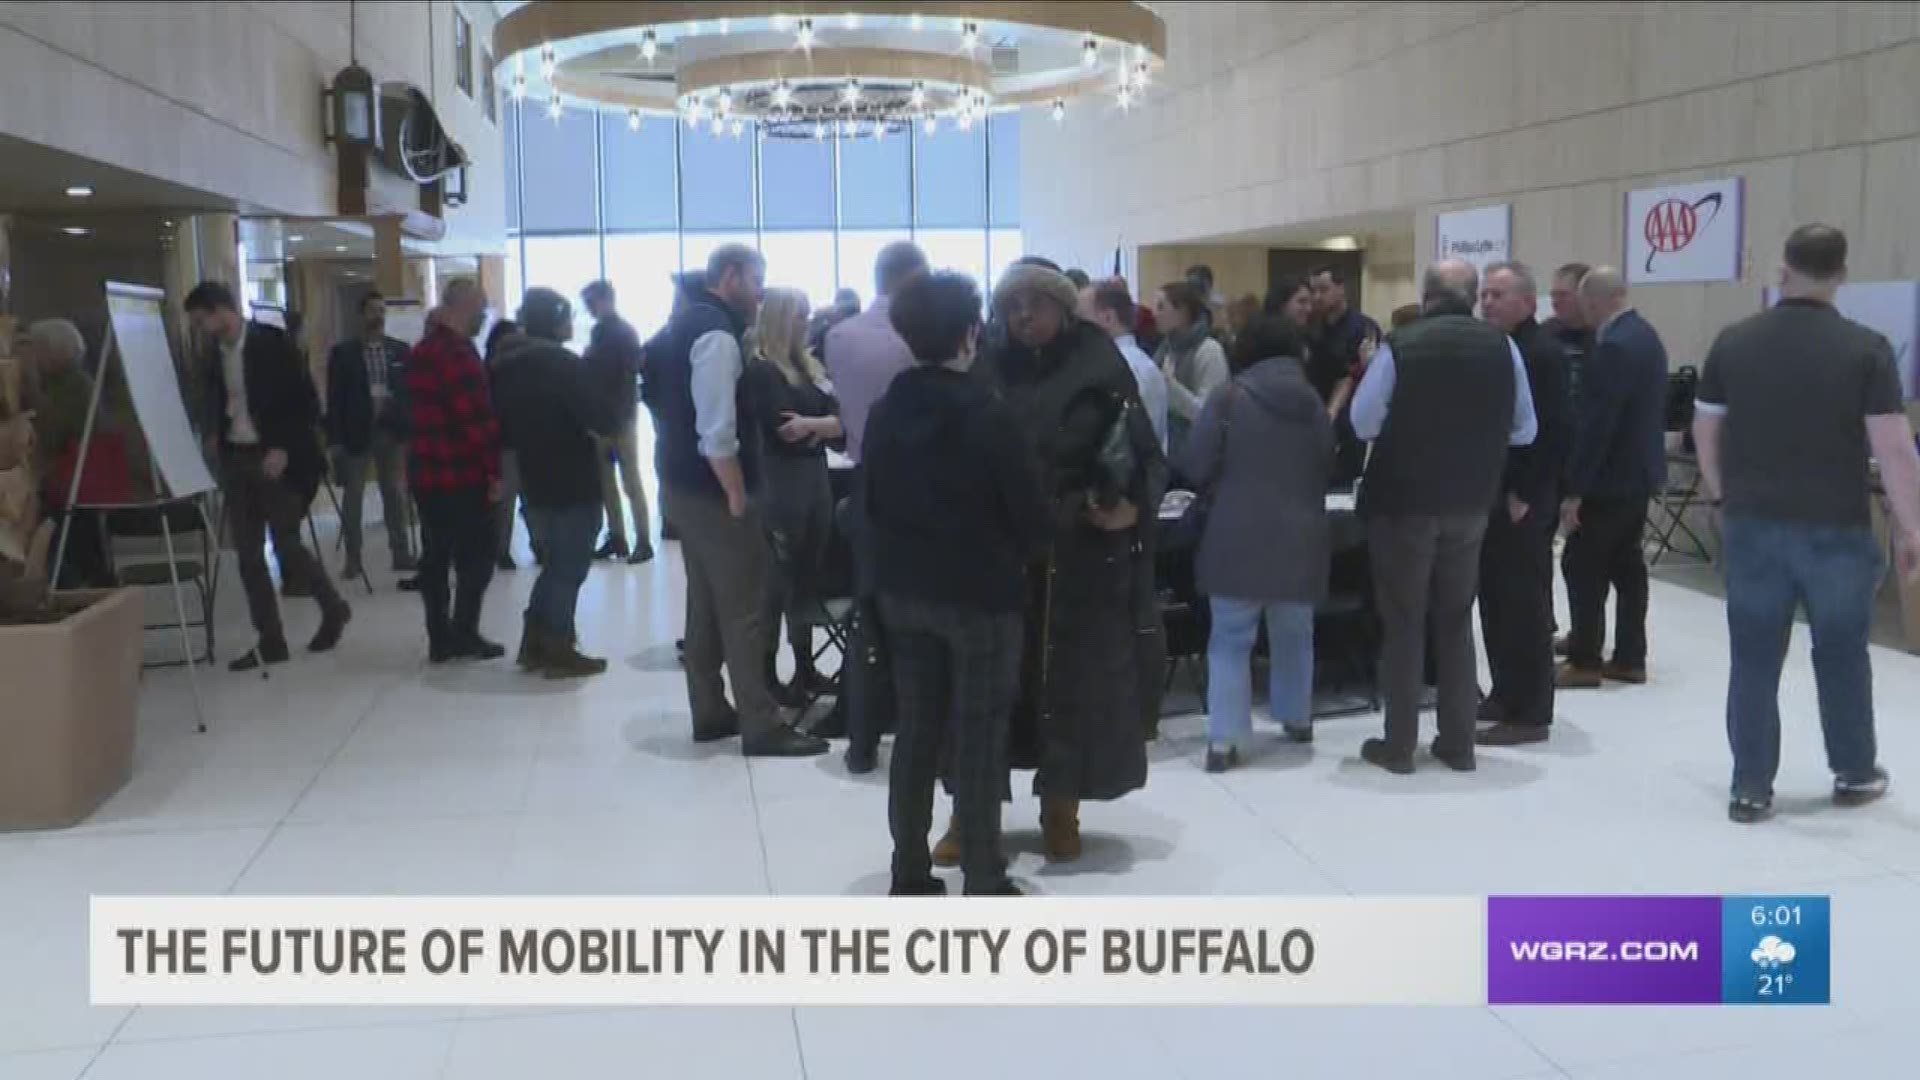 As technology advances, so do our transportation options and Buffalo Mayor Byron Brown wants to make sure the city is prepared for whatever changes could come.